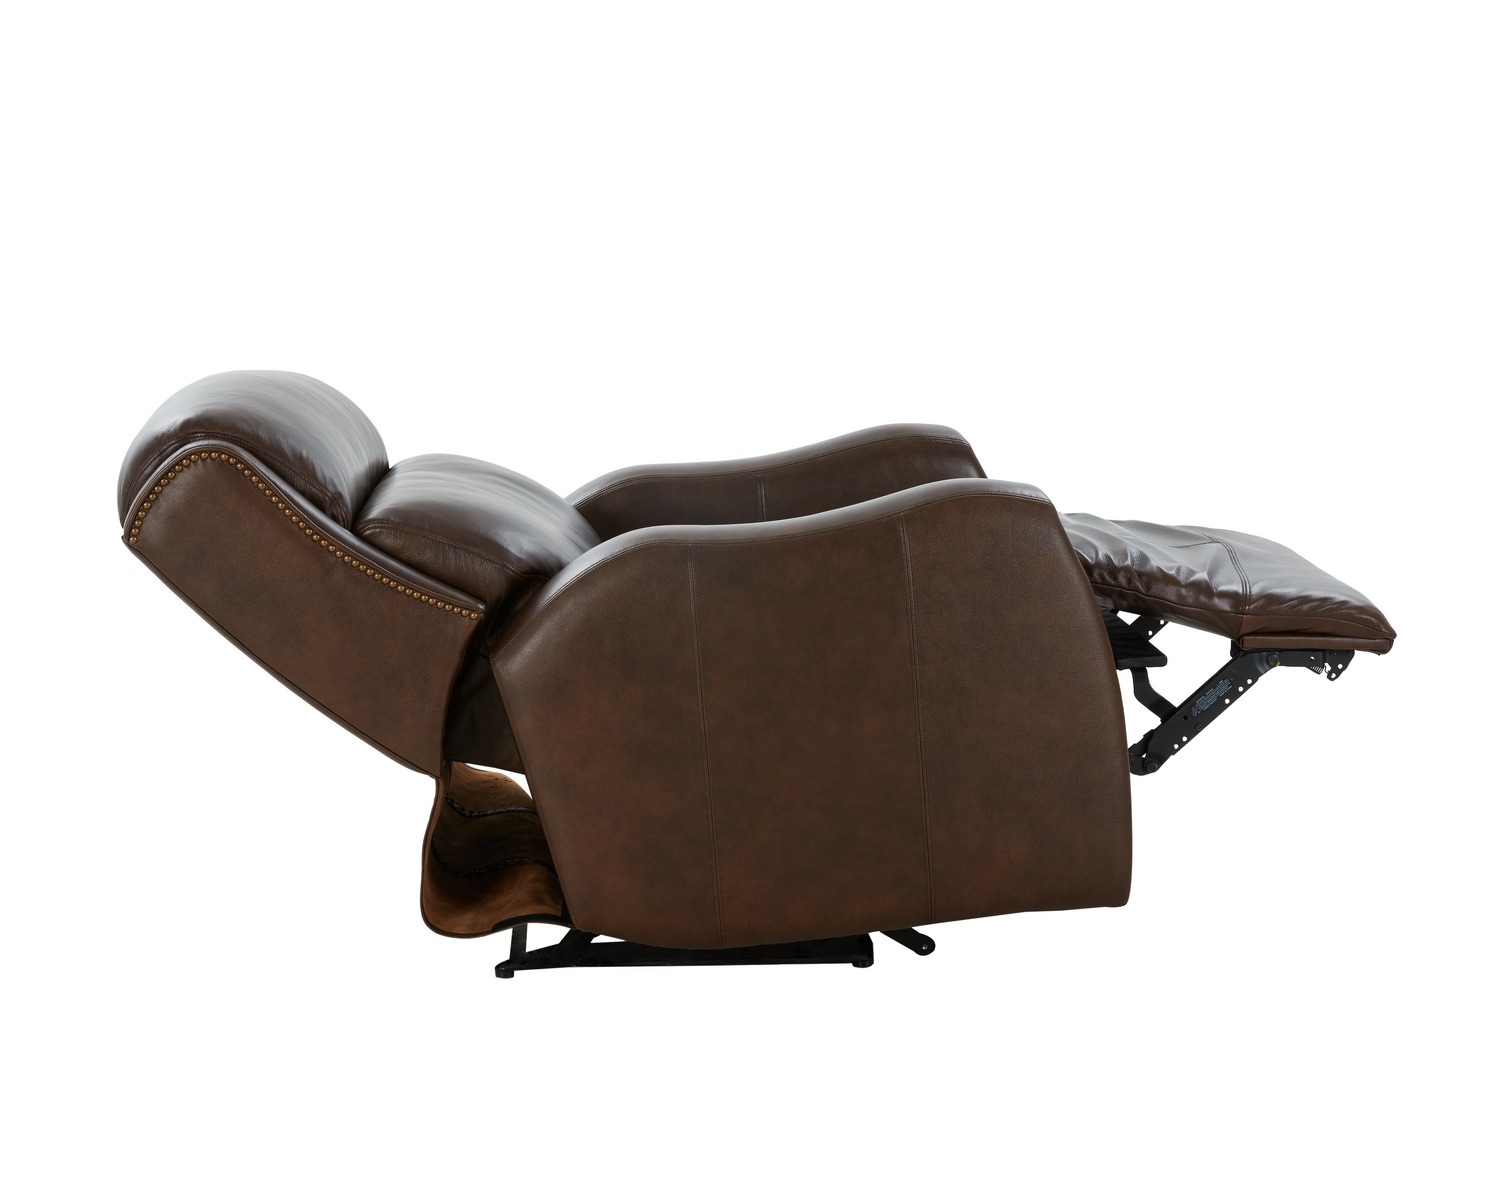 Barcalounger Brookside Power Recliner Chair with Power Head Rest and Power Lumbar - Ashford Walnut/All Leather